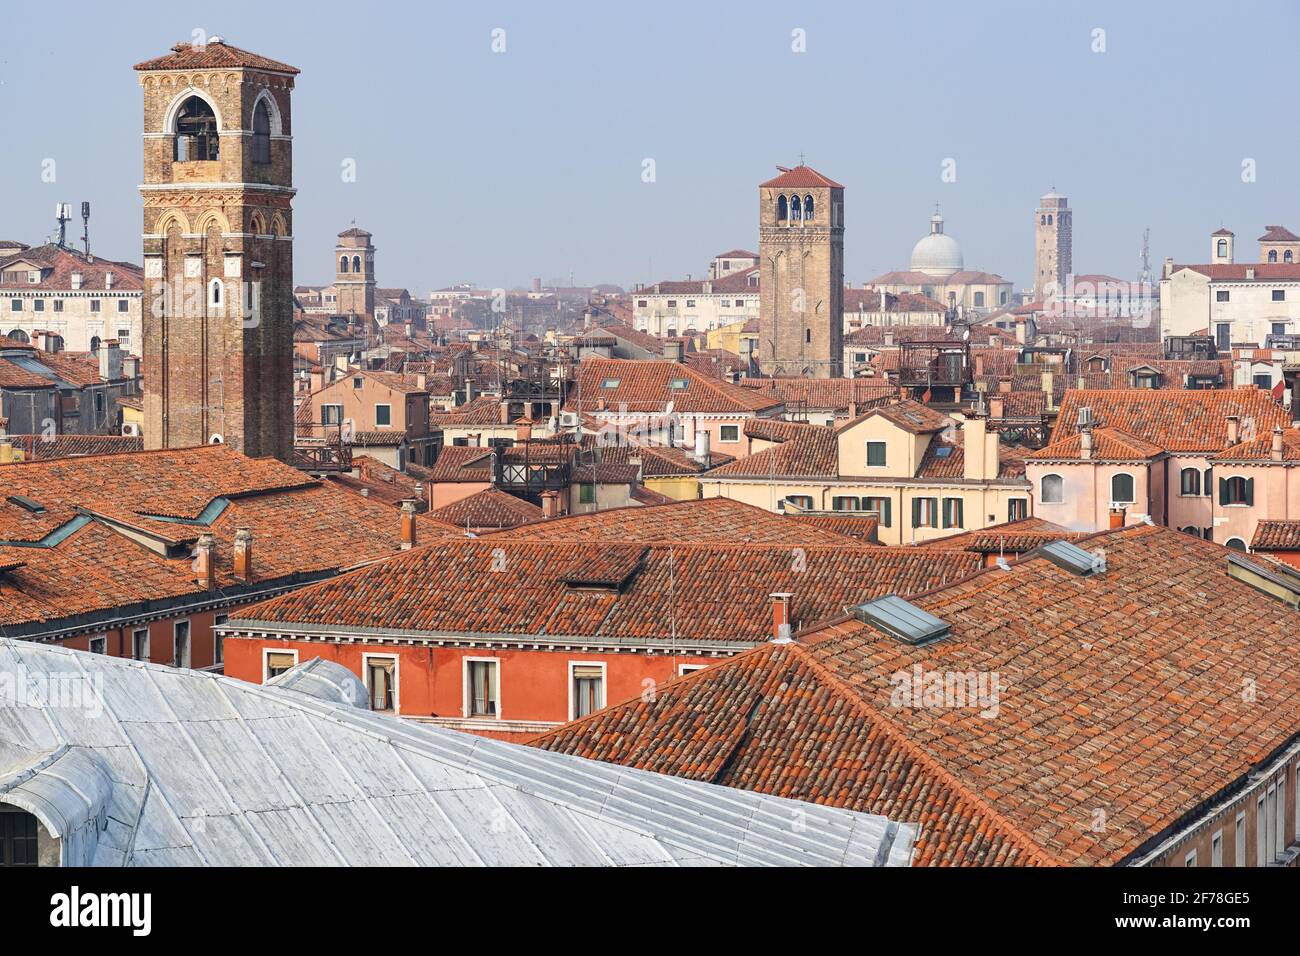 View of red tiled rooftops in Venice, Italy Stock Photo